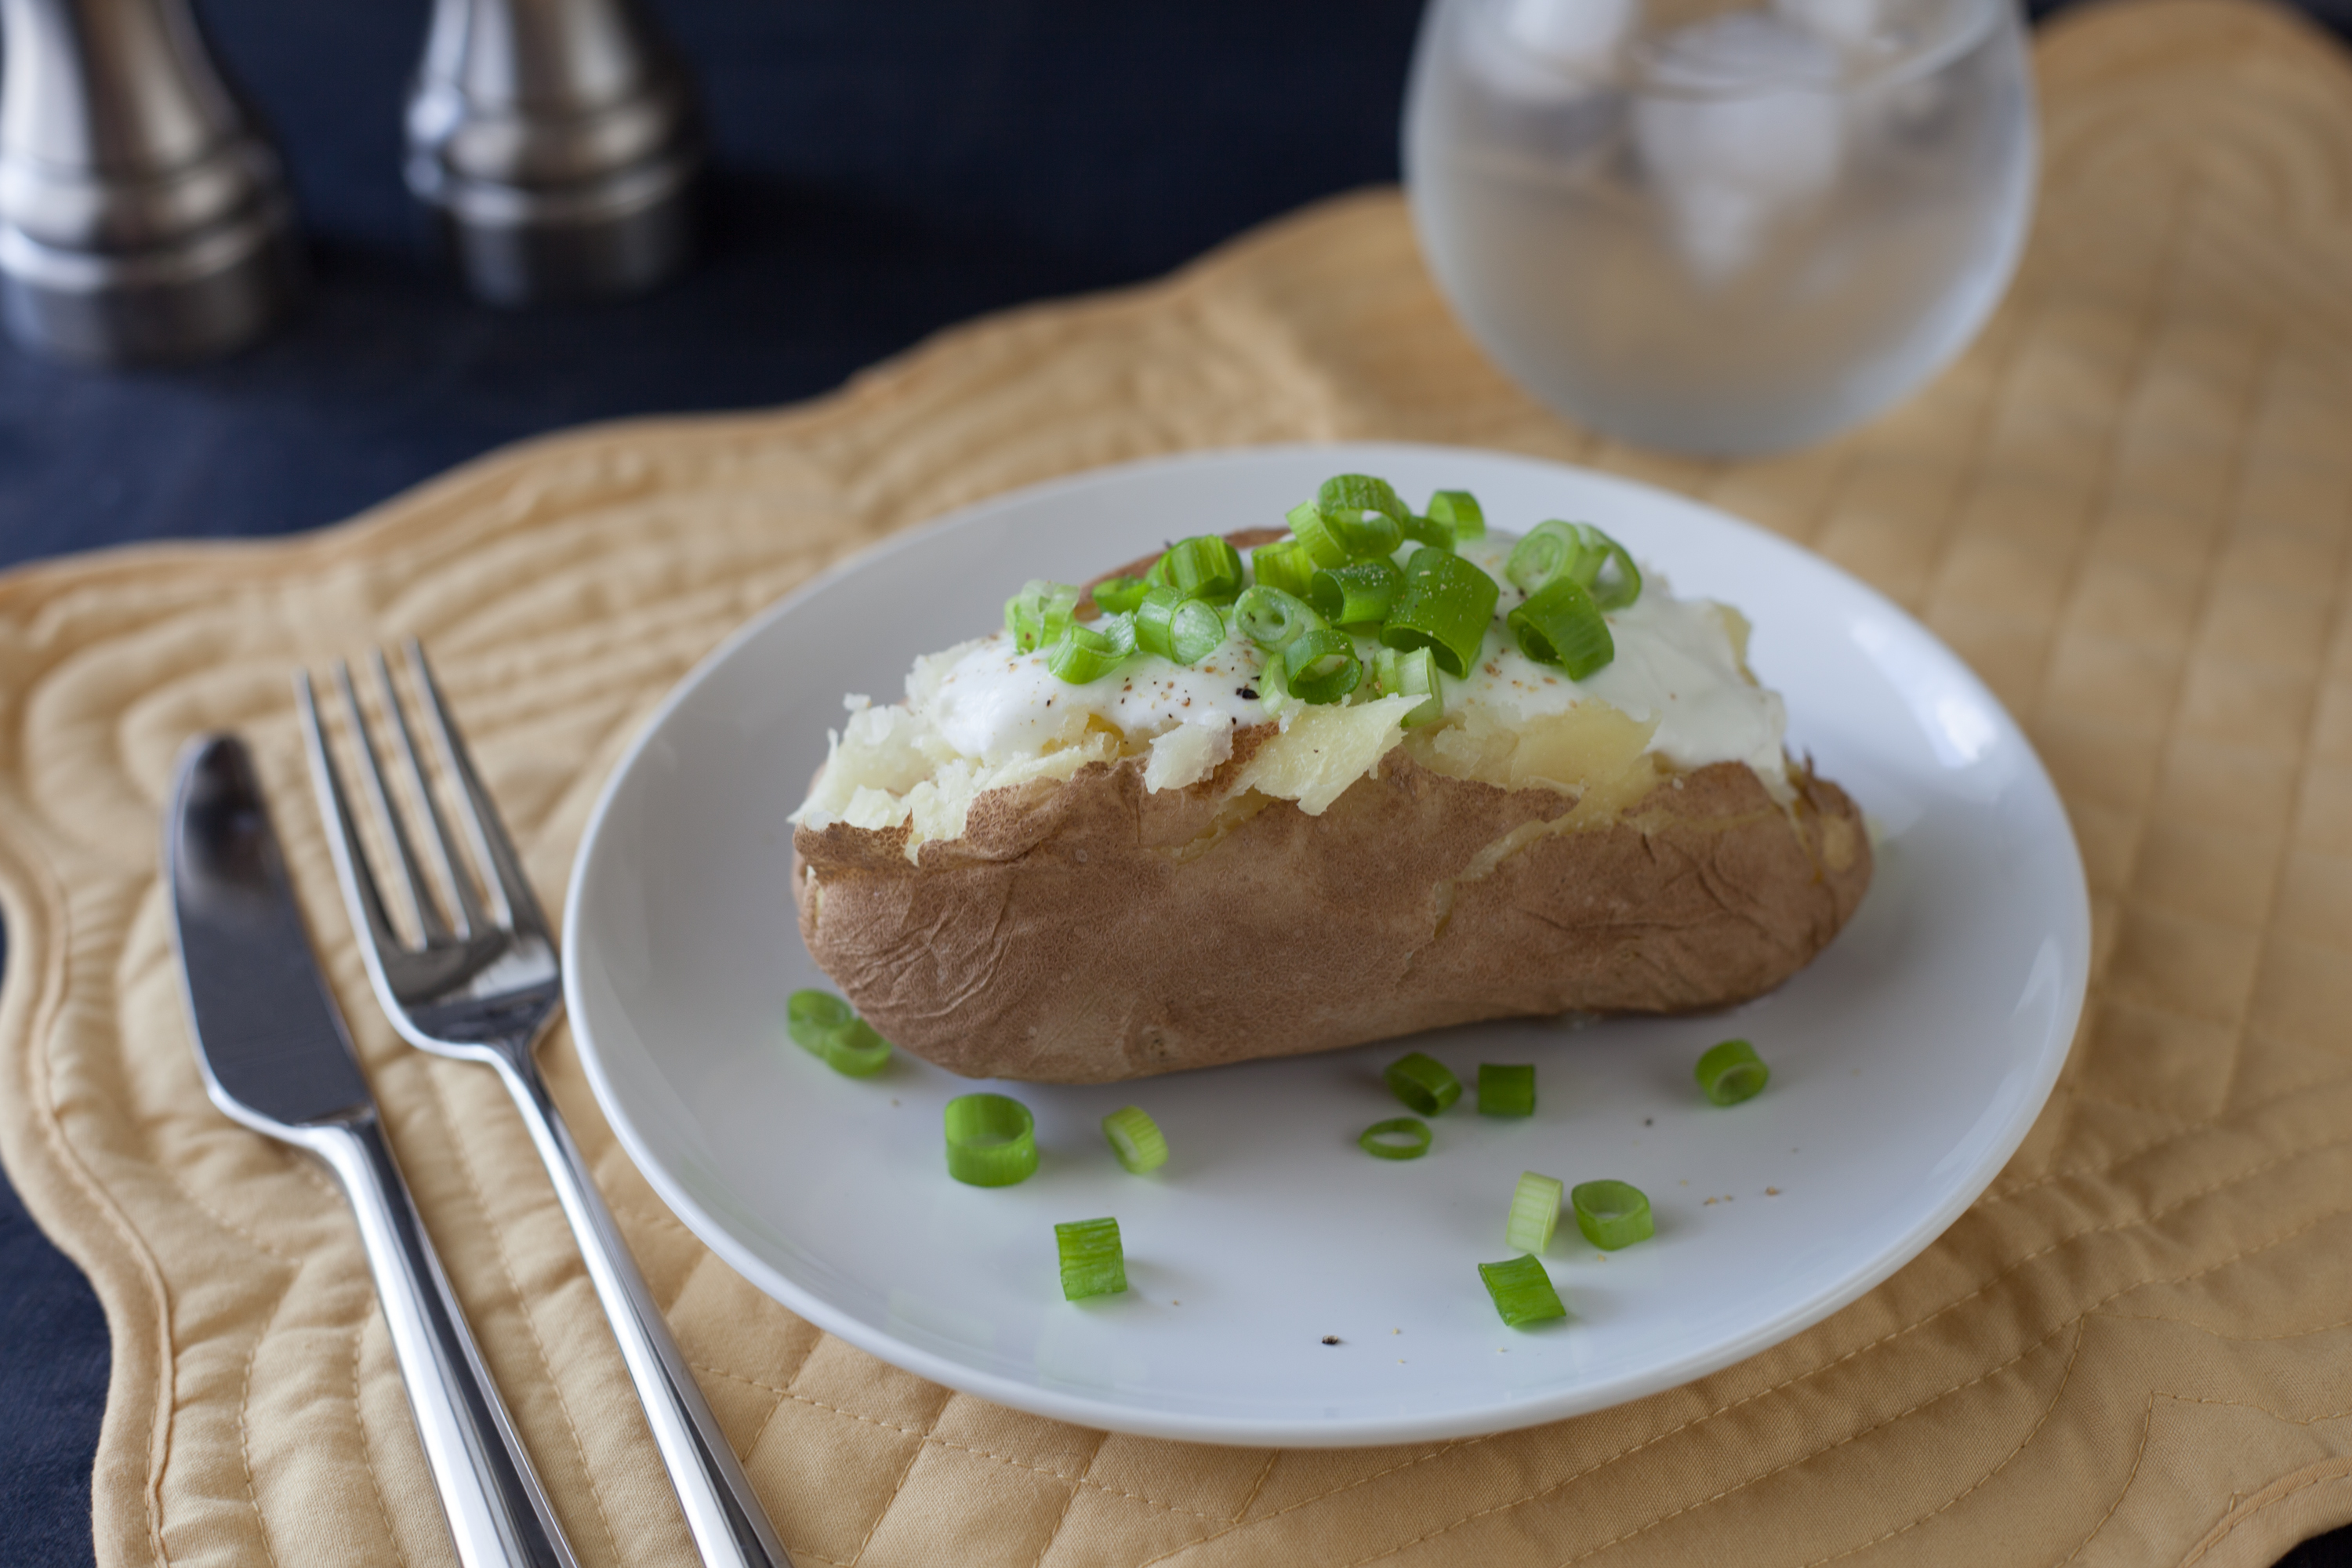 Baked Potato Bag for Microwave, Step-by-Step Instructions